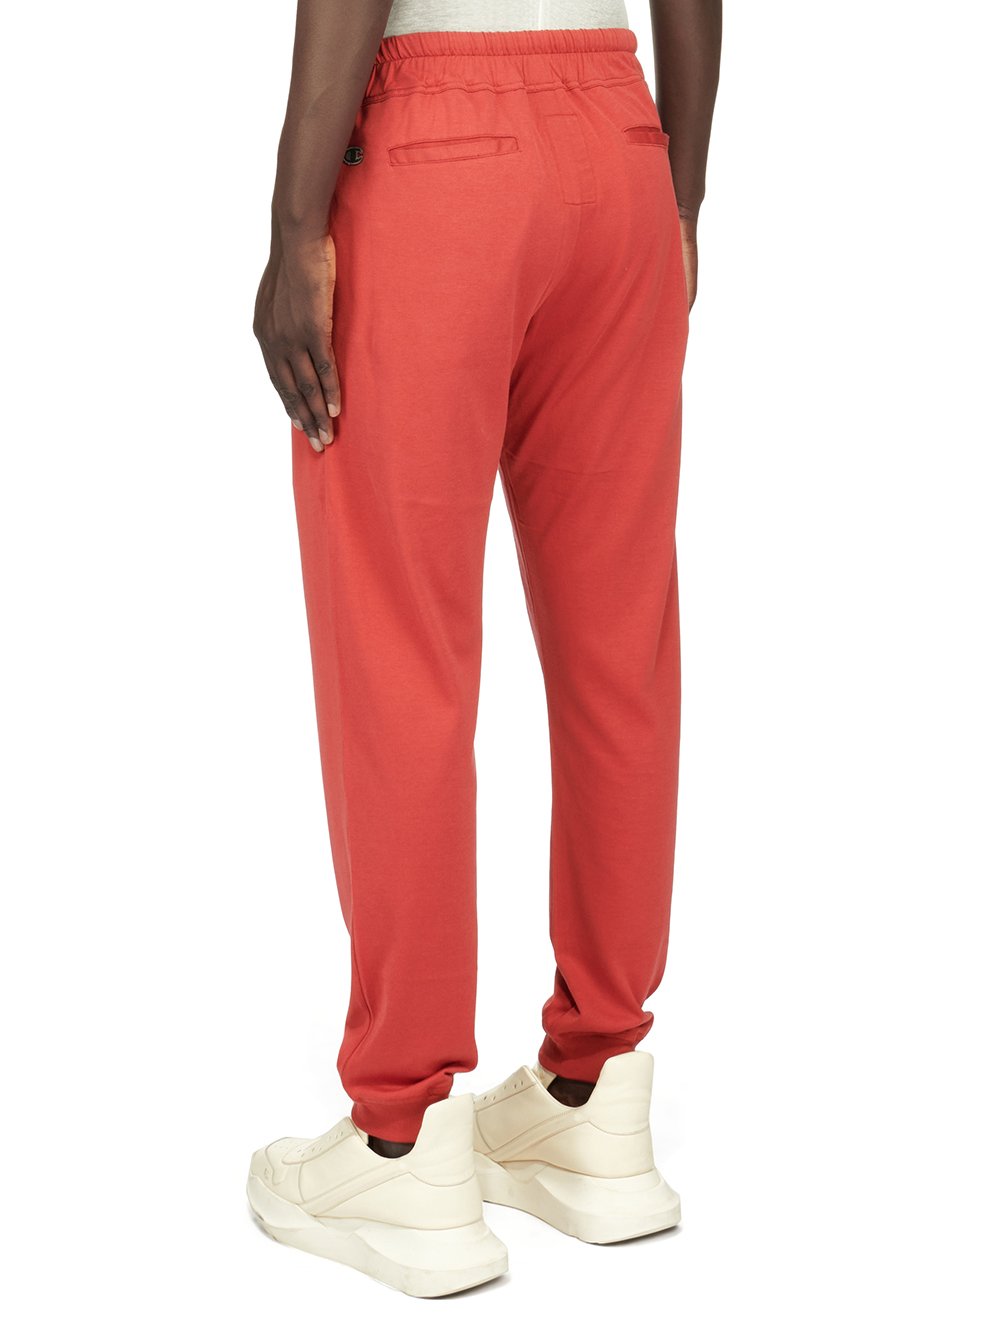 CHAMPION X RICK OWENS JOGGERS IN CARNELIAN RED MEDIUM WEIGHT COTTON JERSEY 